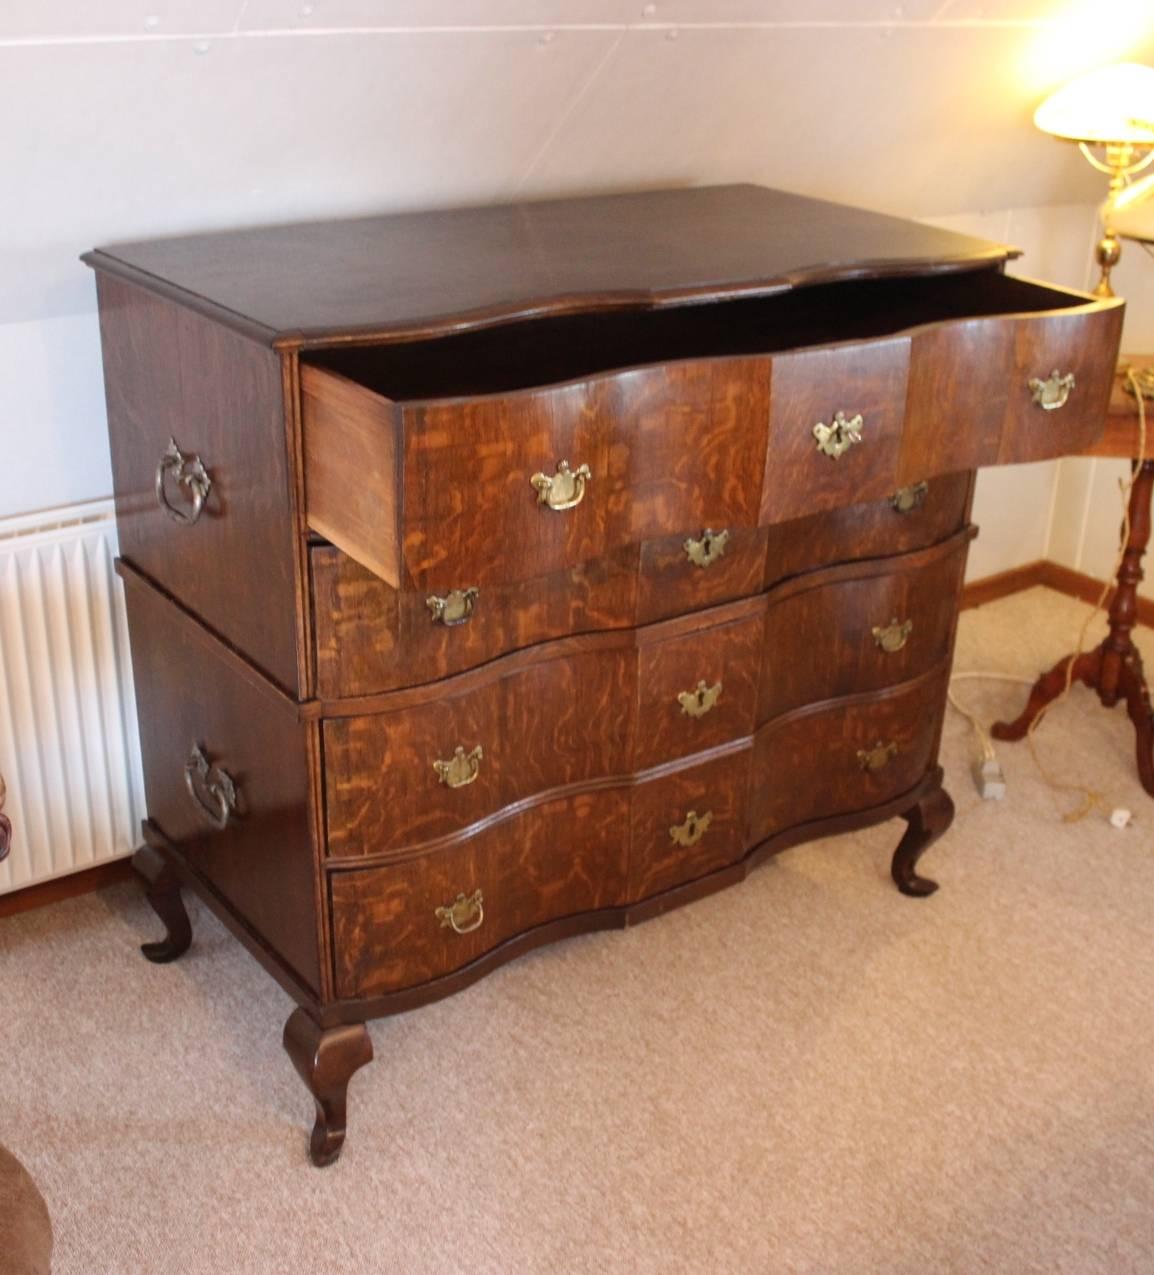 Danish Large Baroque Style Chest of Drawers in Oak, 1740